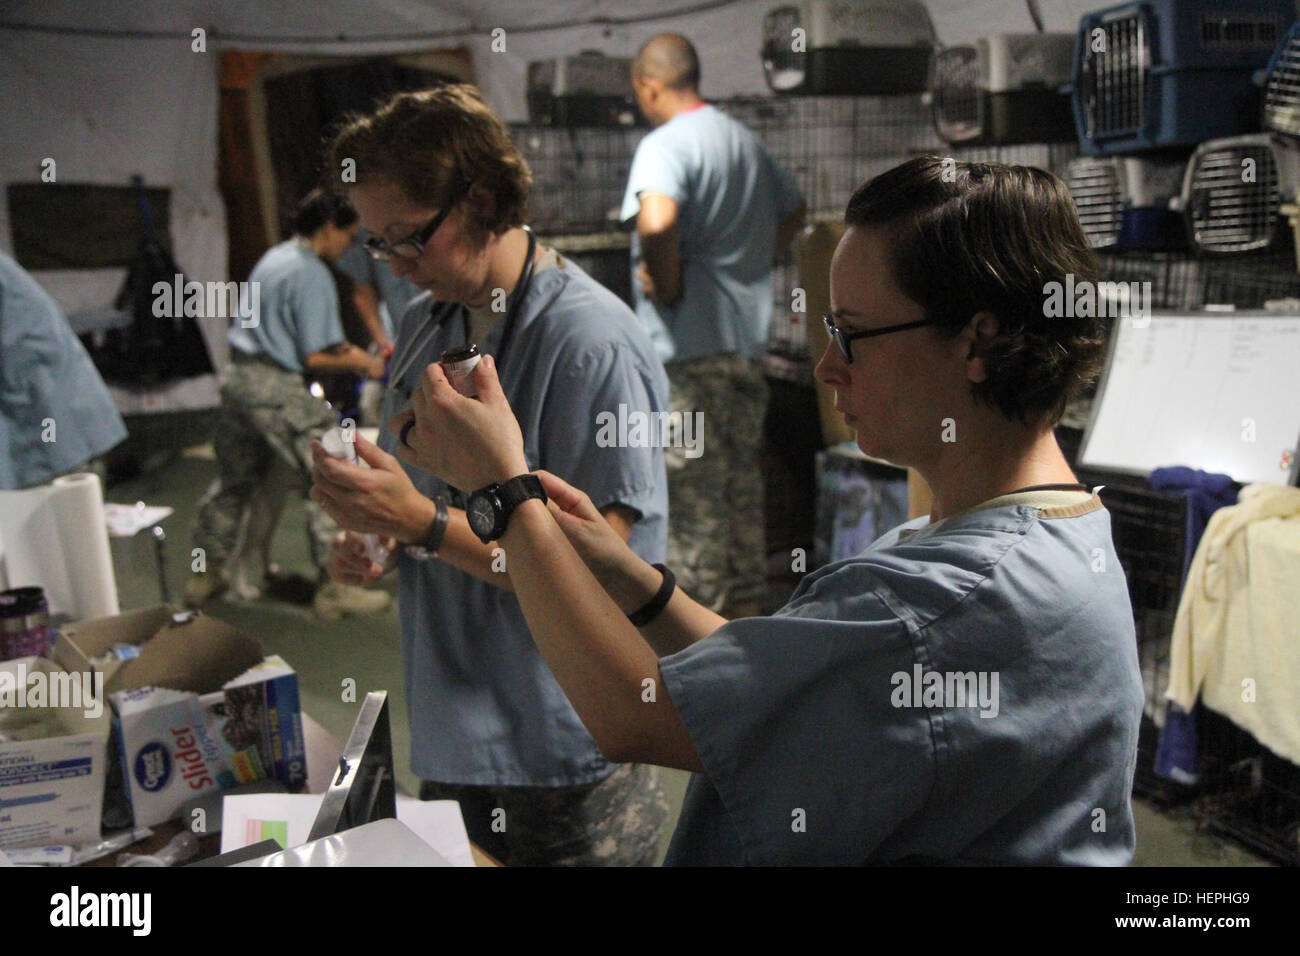 Capt. Kimberly Jordan, right, a veterinary preventive medicine officer with the 169th Medical Detachment Veterinary Services out of Fort Gordon, Ga. and Capt. Rachel Hathorn, a field veterinary service officer with the 358th Medical Brigade out of Montgomery, Ala., prepare medications that will be administered to animals prior to surgery at Greater Chenango Cares July 15, 2015. Greater Chenango Cares is one of many Innovative Readiness Training missions designed to provide real-world training in a joint civil-military environment while delivering world-class medical care to the citizens of Che Stock Photo